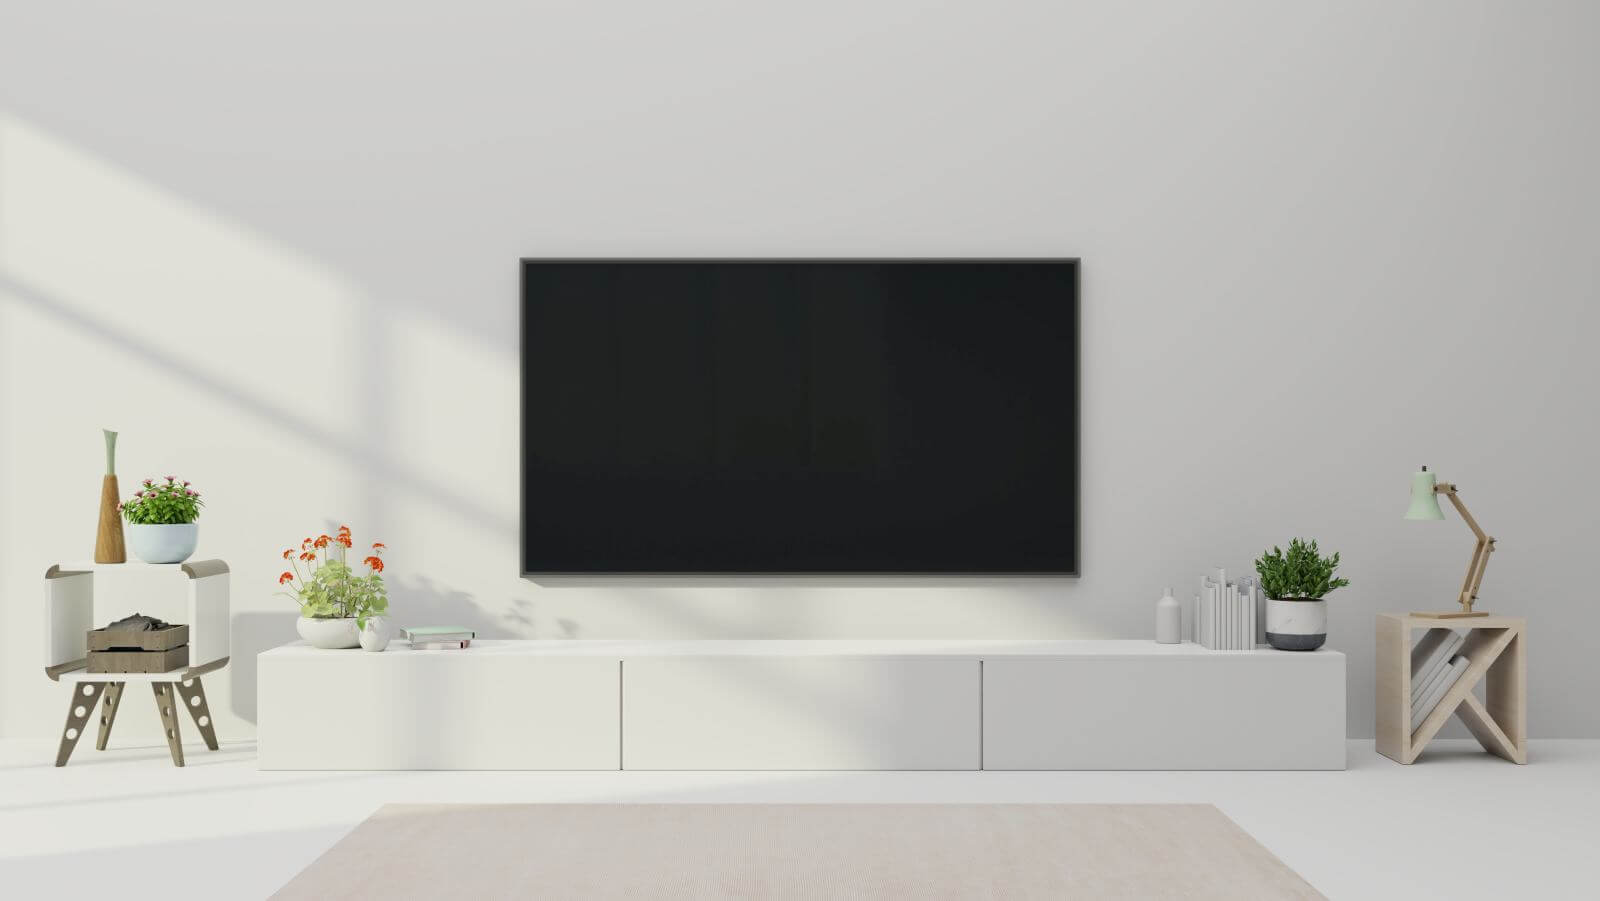 TV on the cabinet in modern living room with plant on white wall background,3d rendering